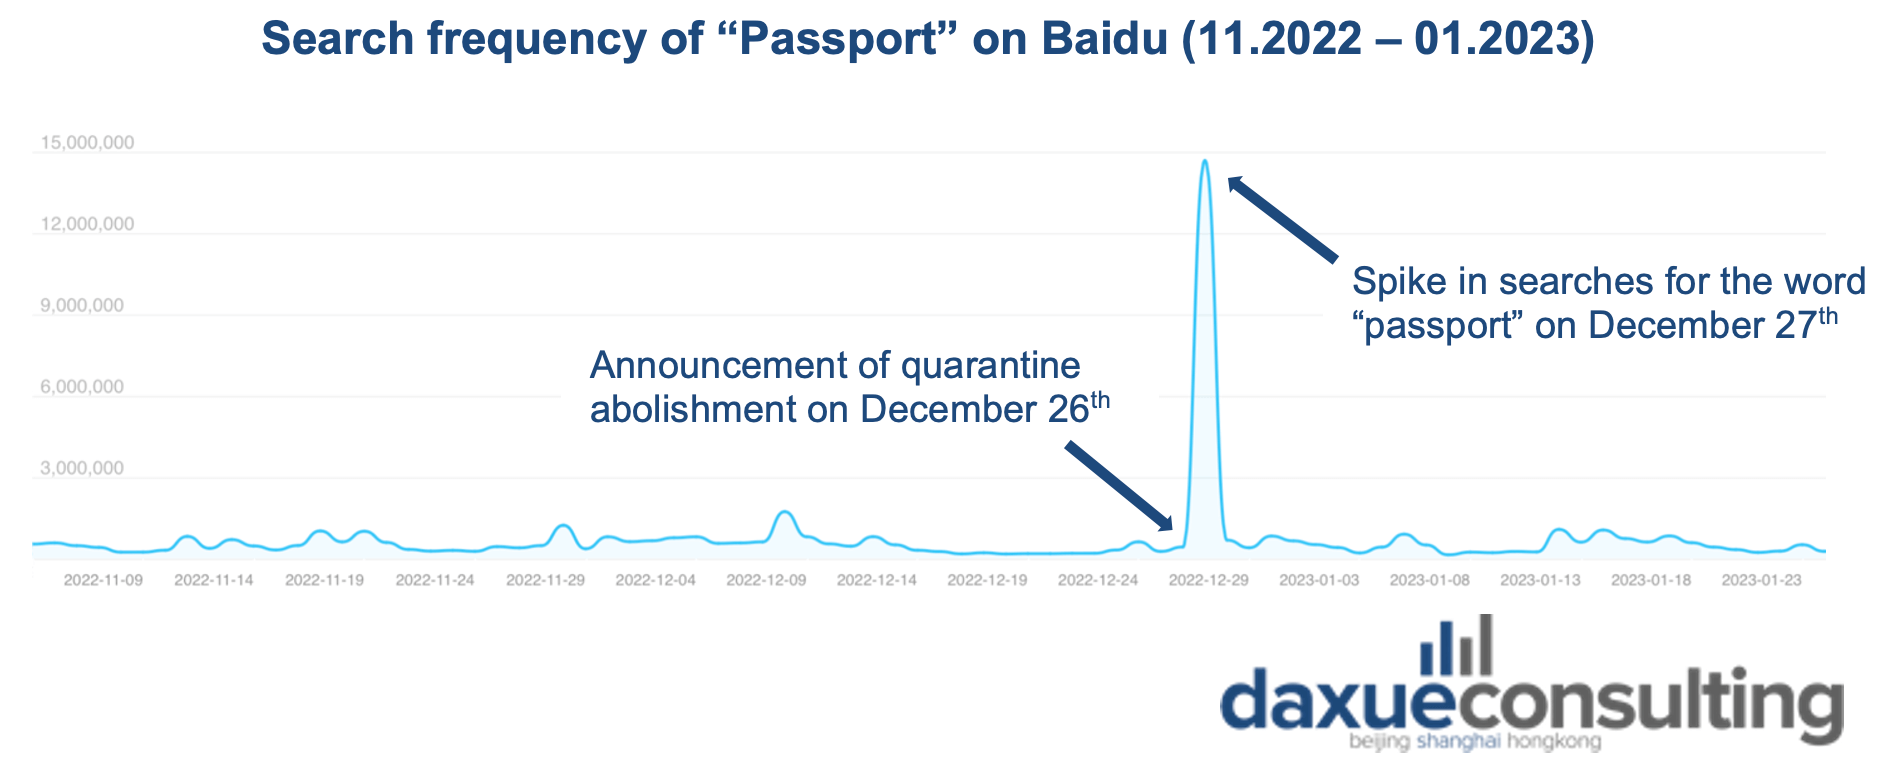 Searches for the keyword “passport” spiked on December 27th, the day after the Chinese quarantine was abolished. 